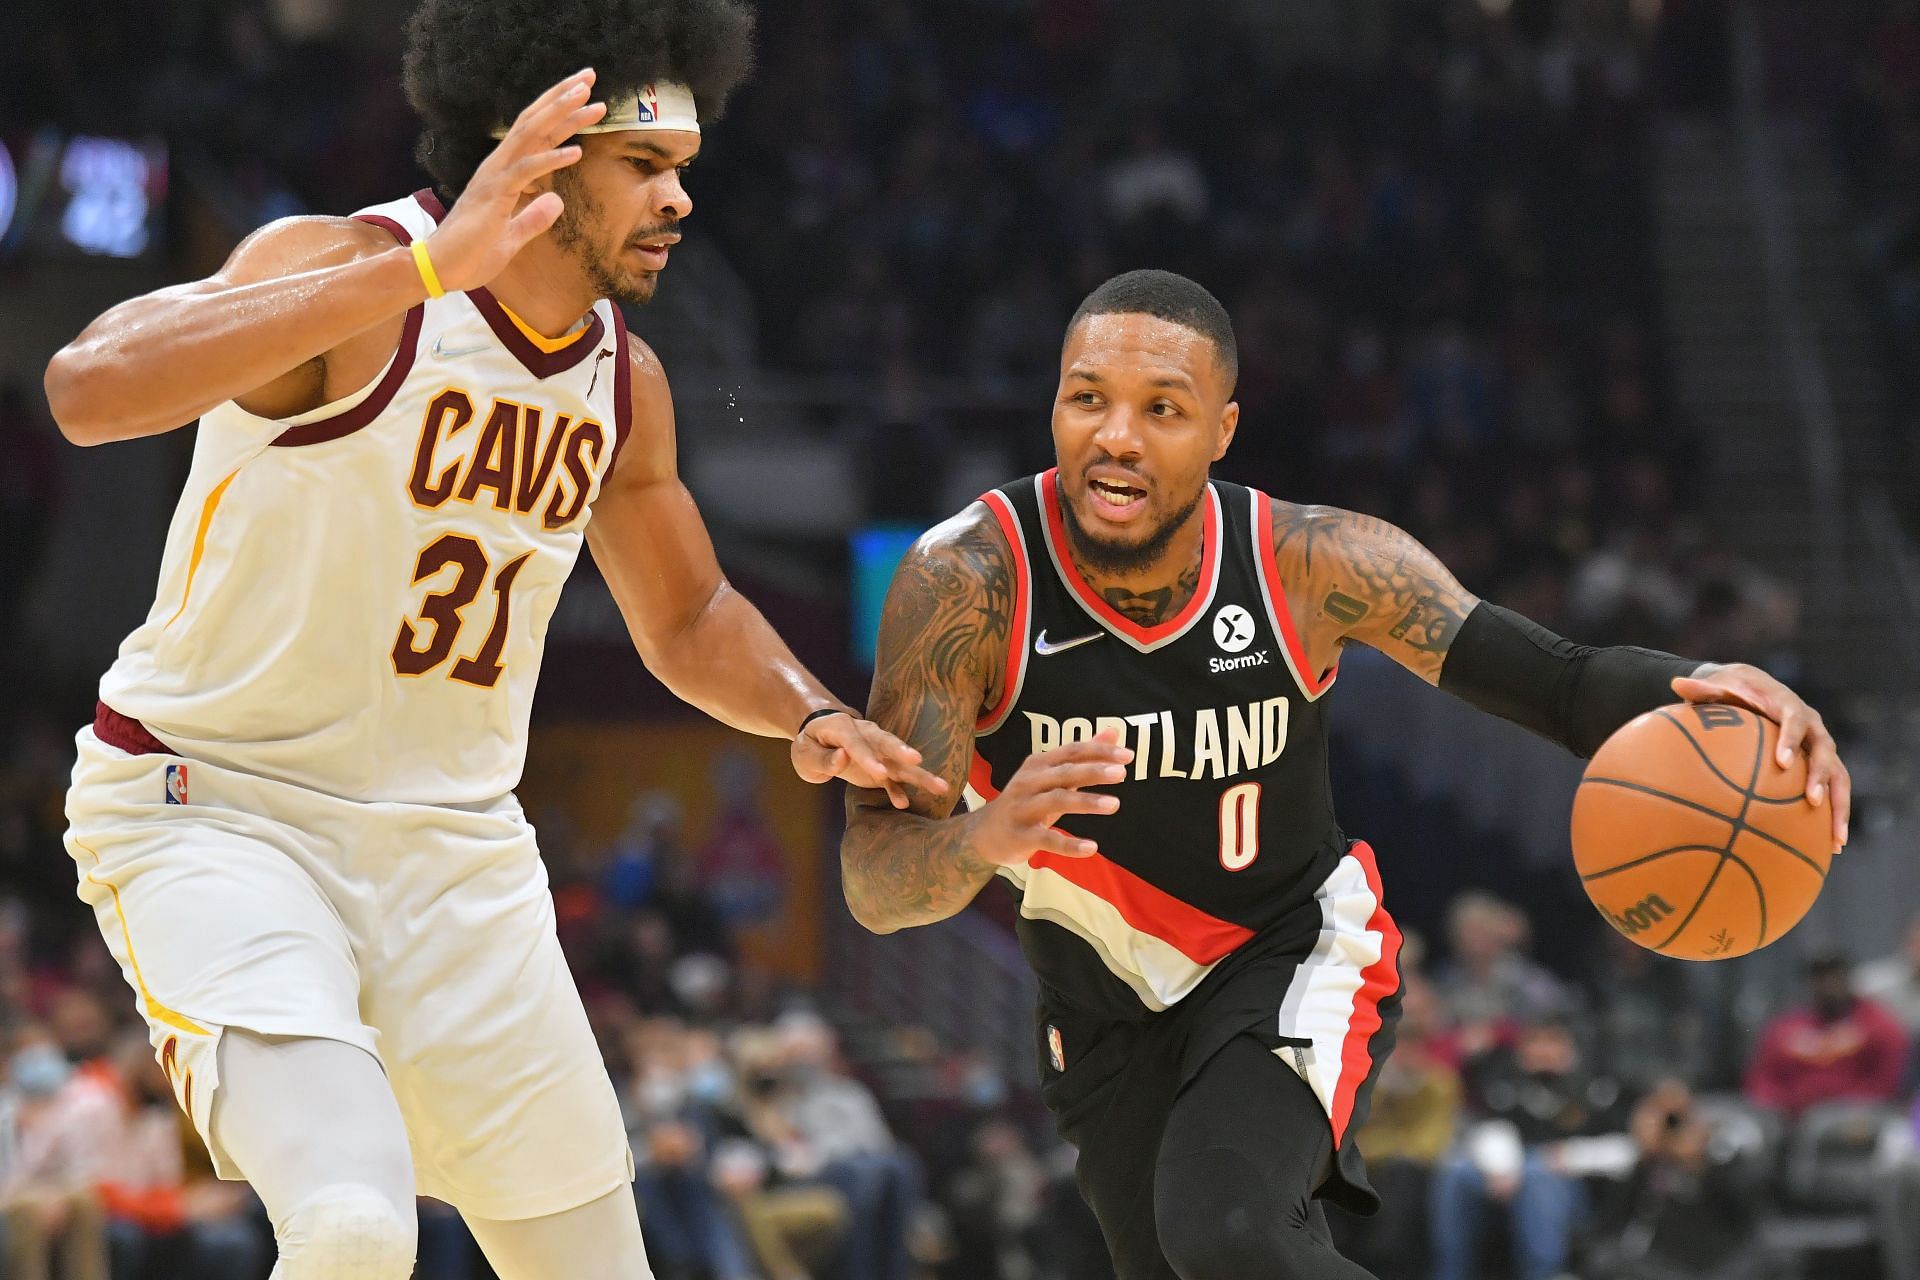 The Portland Trail Blazers are still looking to find their footing in the 2021-22 NBA season